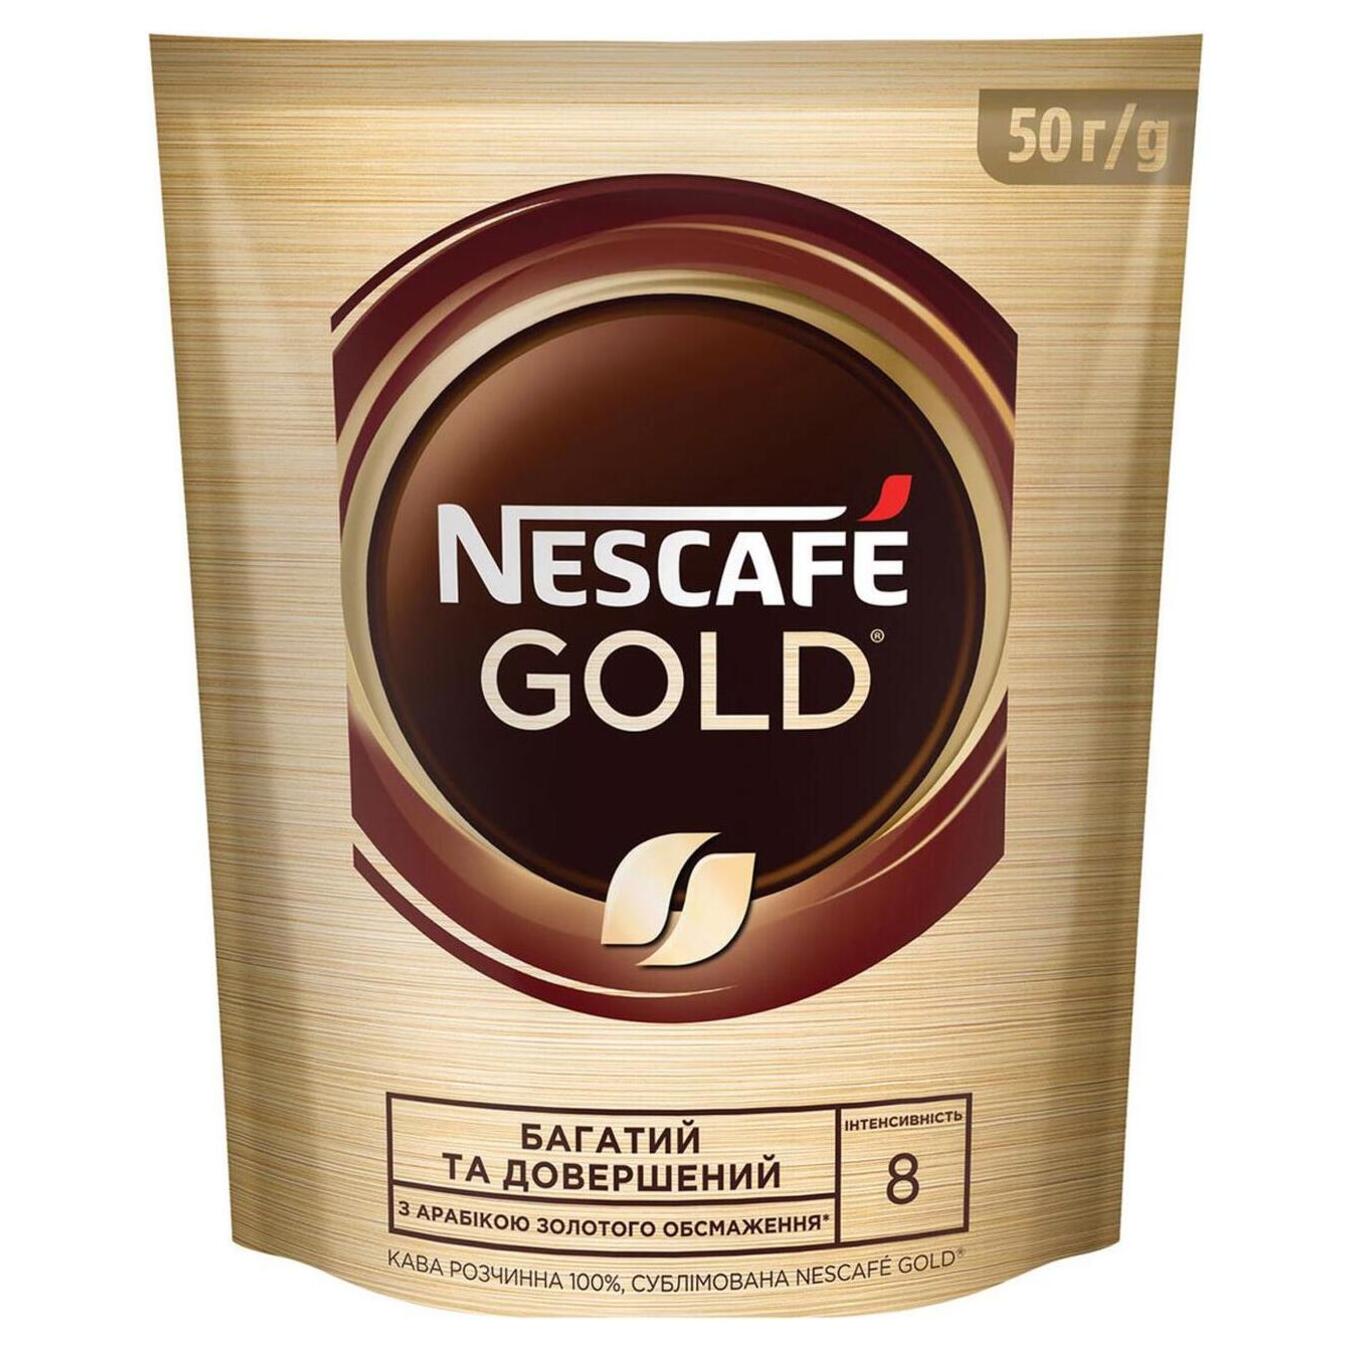 Coffee Nescafe Gold instant natural soft packaging 50g